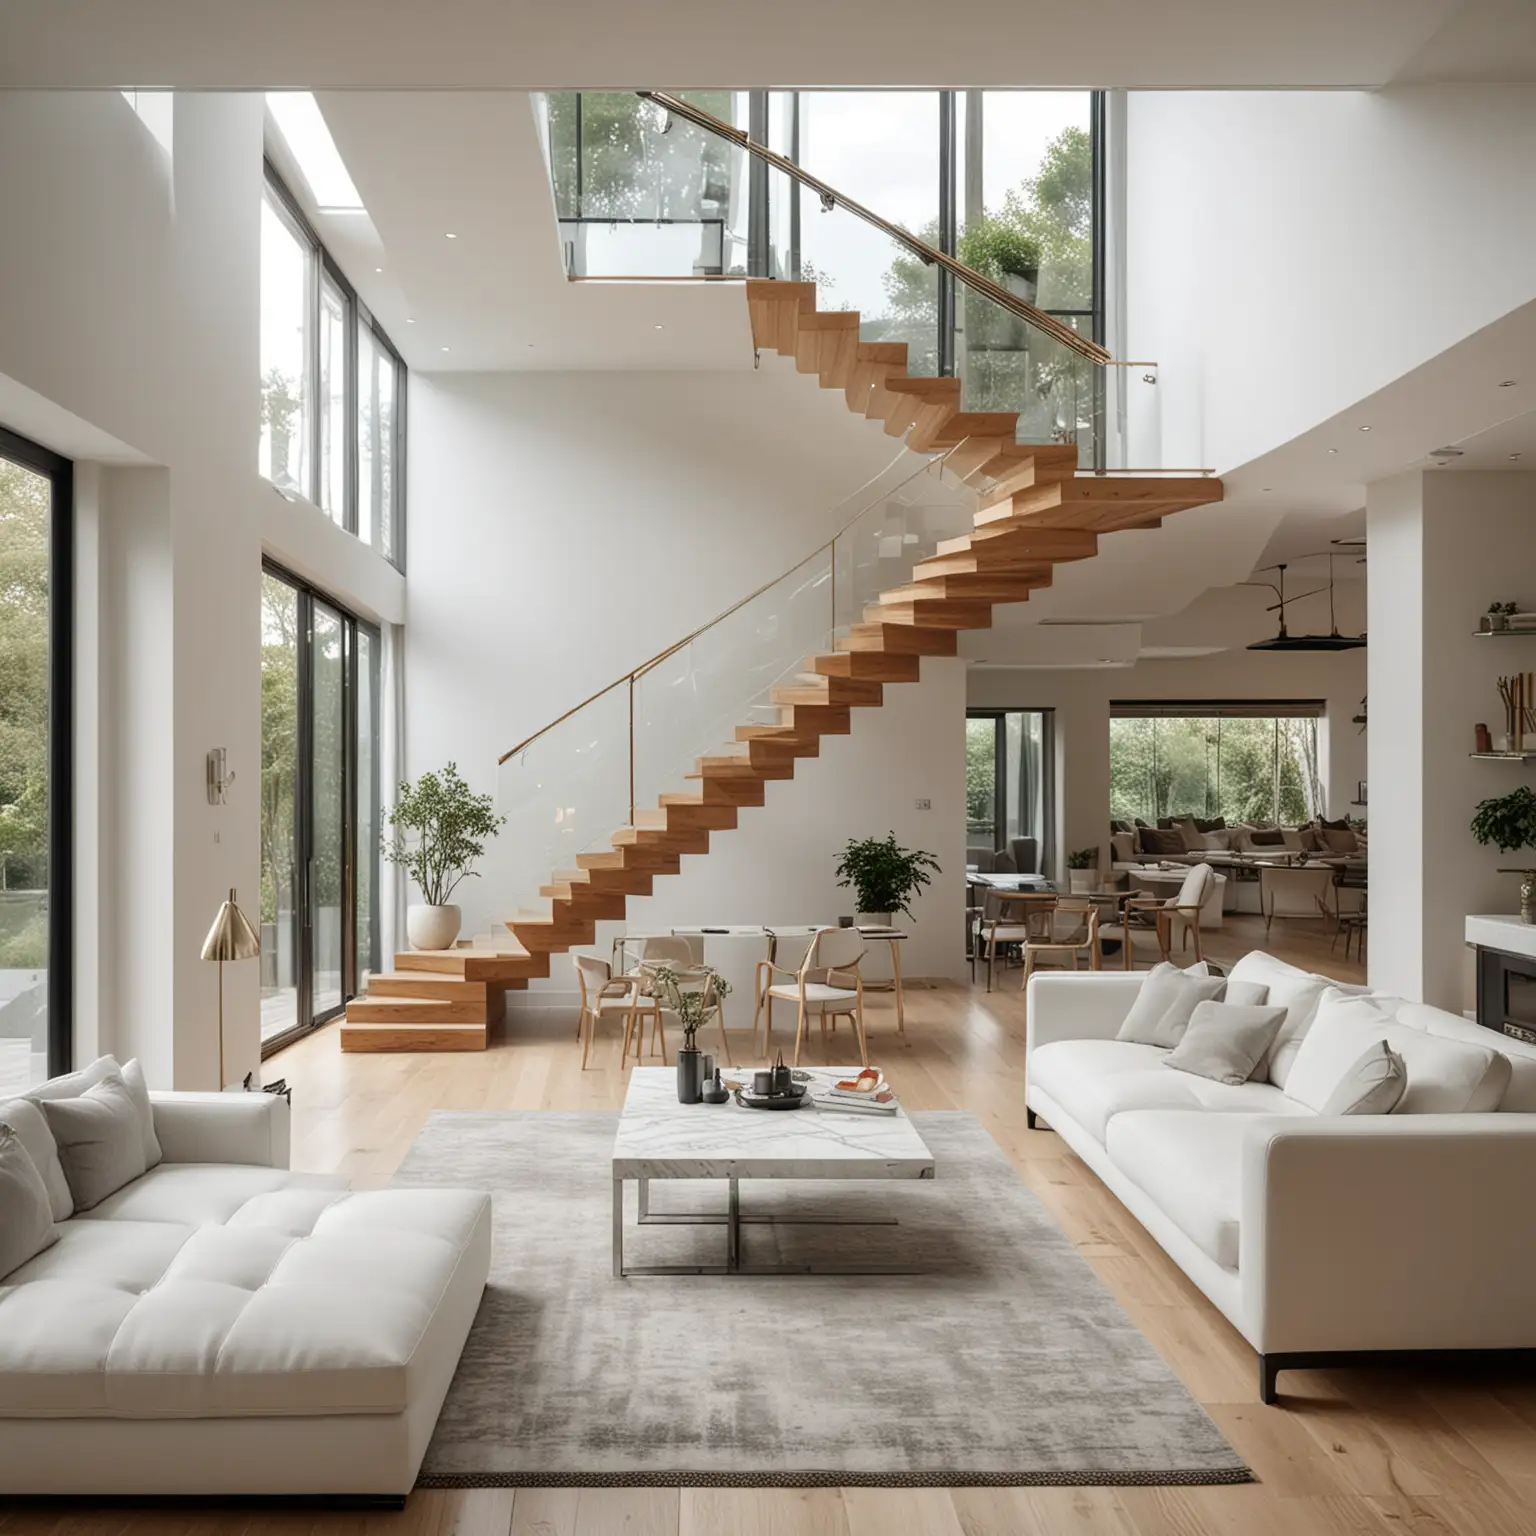 A modern living room with a beautiful white marble table between 2 white sofas ,on the left of the living room there are floor to ceiling glass window and on the right of the living room there are wooden stairs to the second floor, 8k resolution, professional interior design photograph